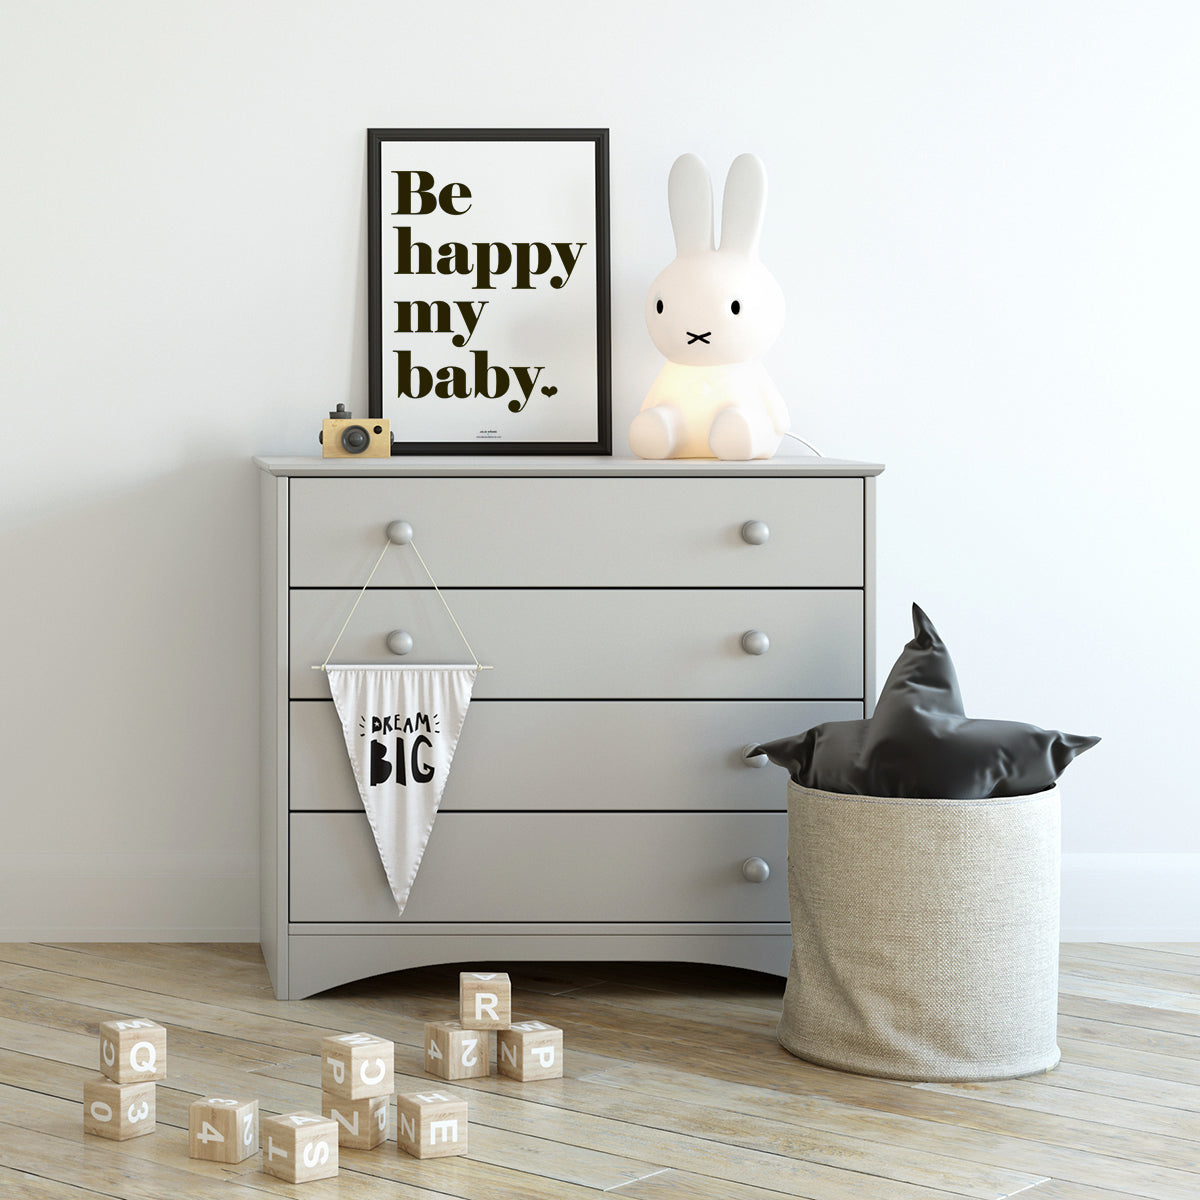 Affiche Be happy my baby